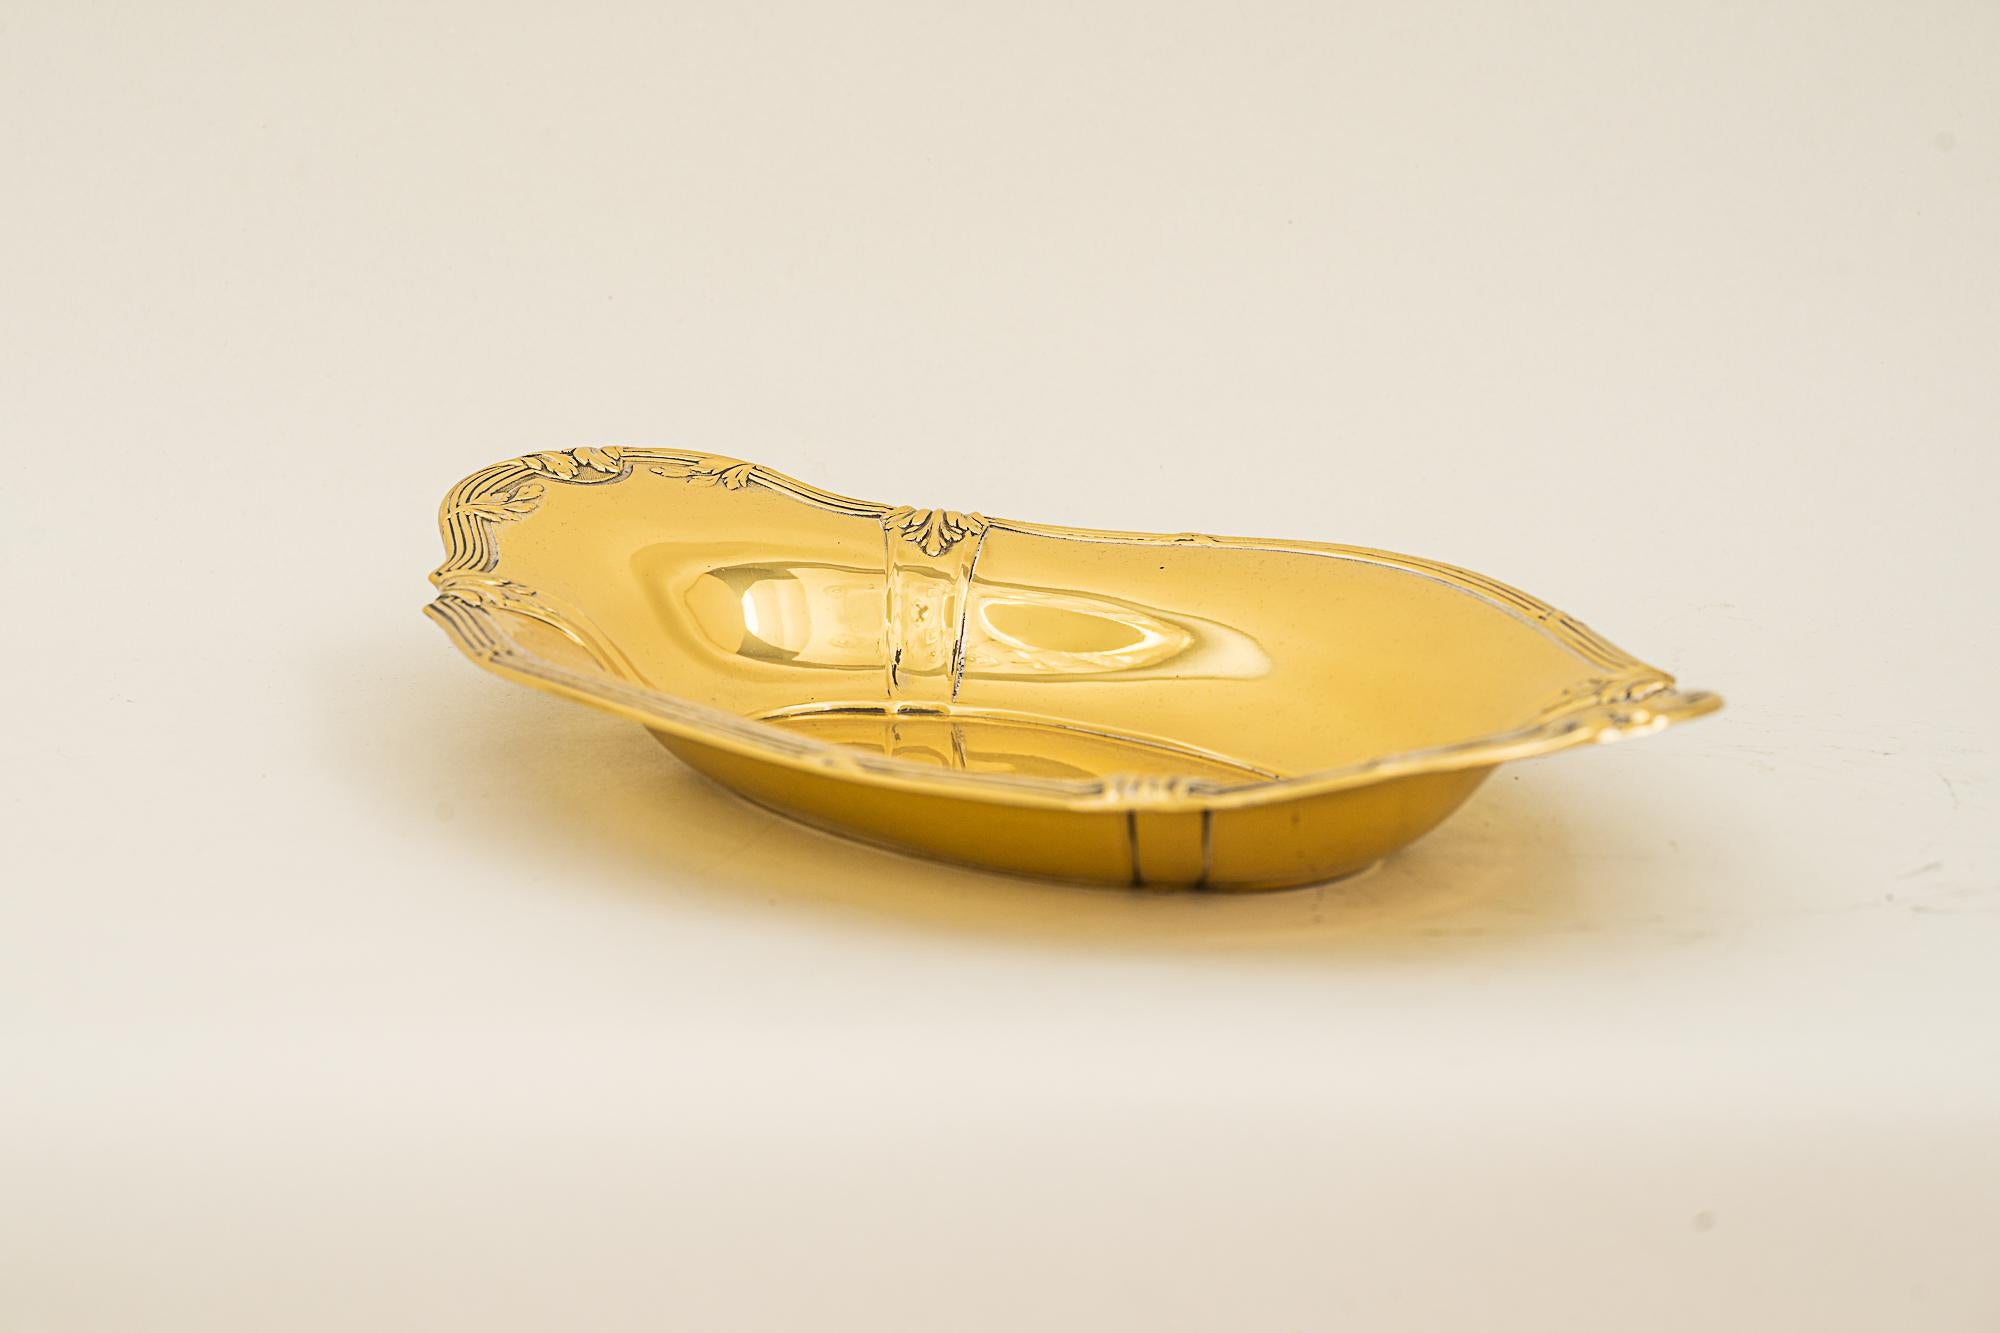 Lacquered Art Deco Fruit Bowl, Vienna, circa 1908 For Sale